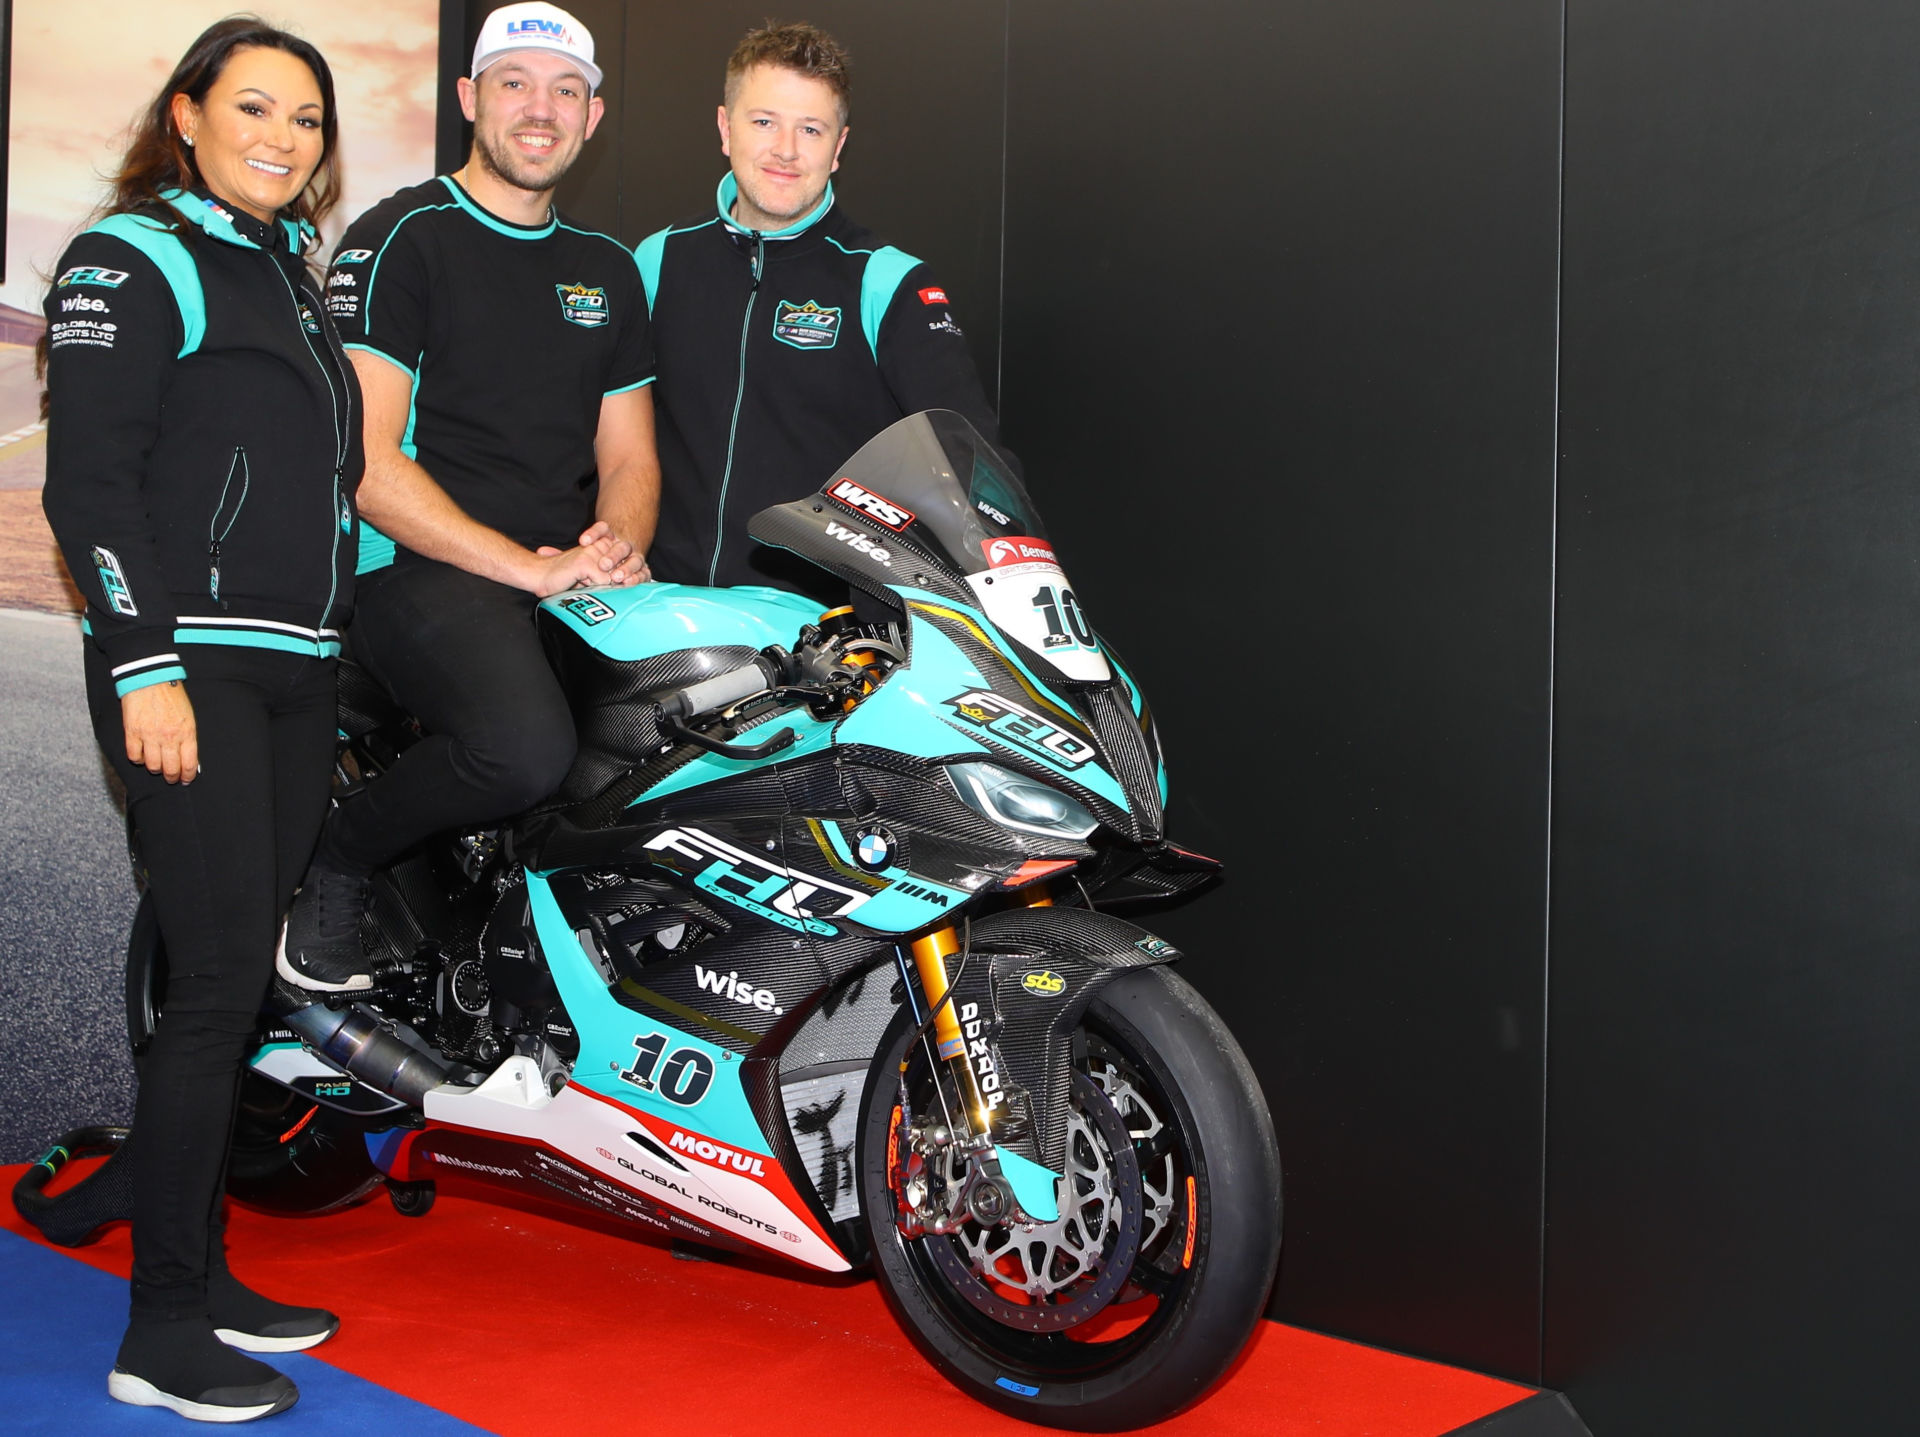 FHO Racing BMW owner Faye Ho (left) with Peter Hickman (center) and Brian McCormack (right). Photo courtesy FHO Racing.